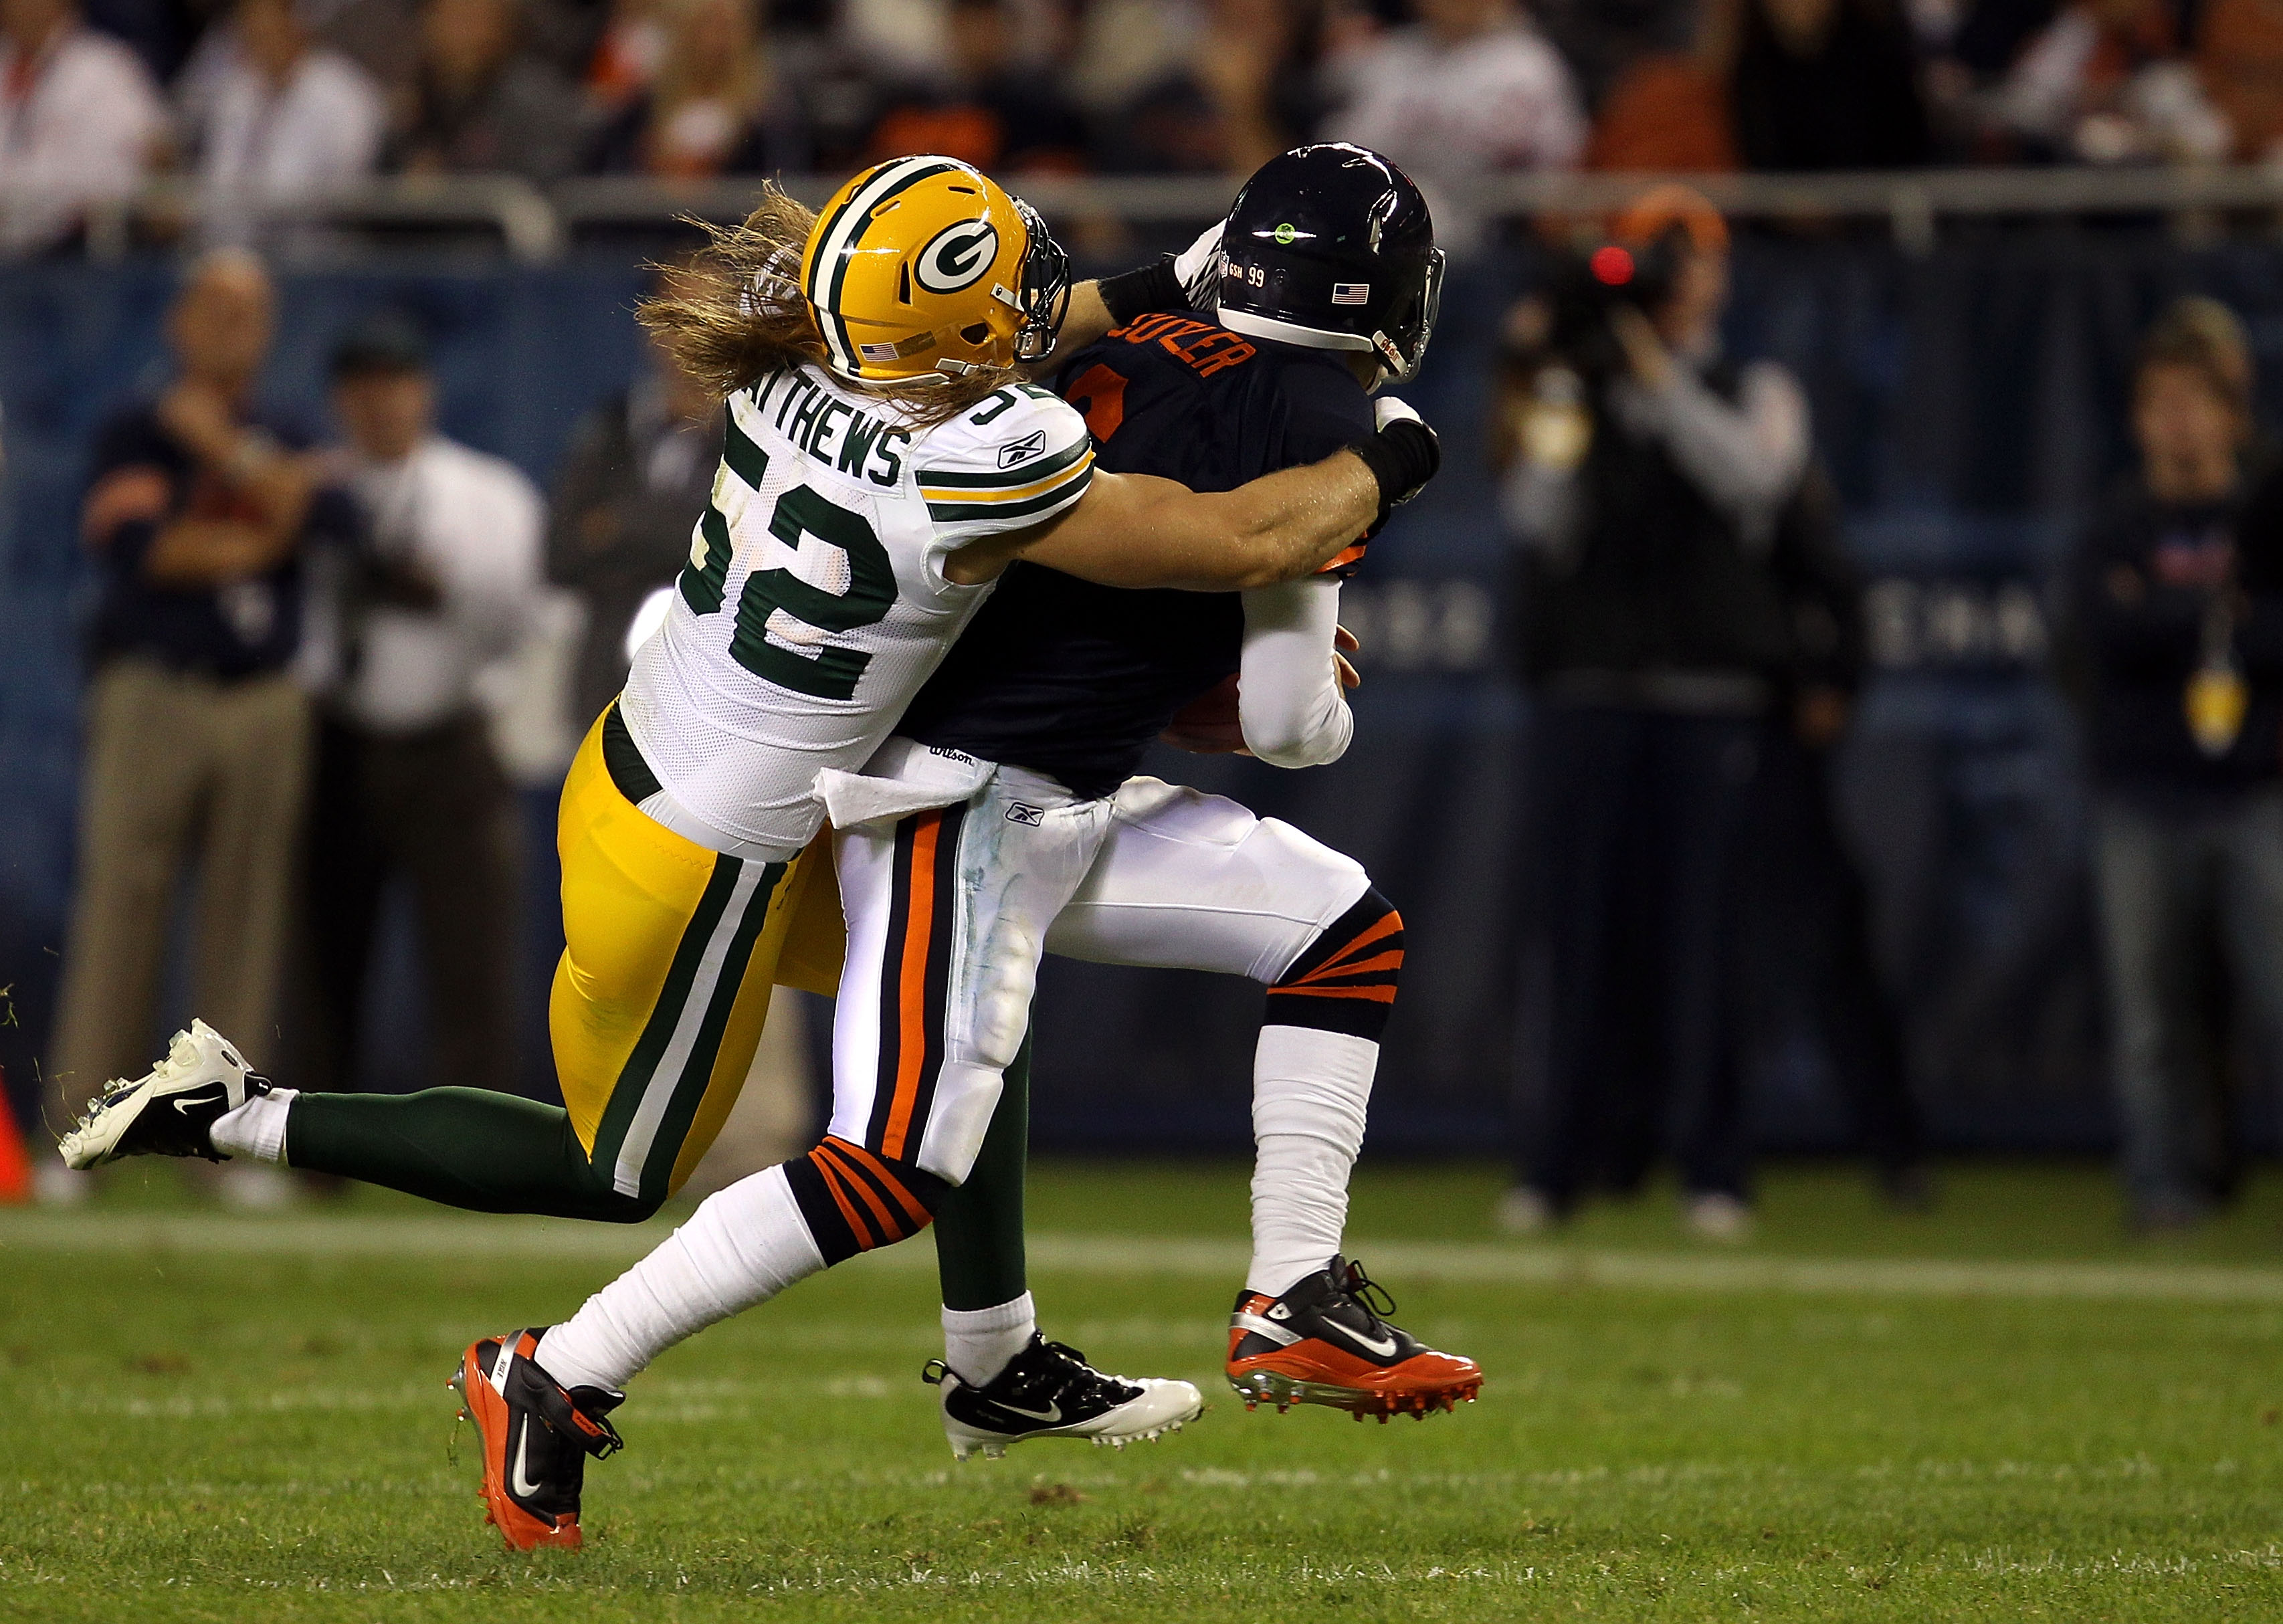 CHICAGO - SEPTEMBER 27:  Clay Matthews #52 of the Green Bay Packers is called for a facemask as he pulls down Jay Cutler #6 of the Chicago Bears in the first quarter at Soldier Field on September 27, 2010 in Chicago, Illinois. The Bears won 20-17. (Photo